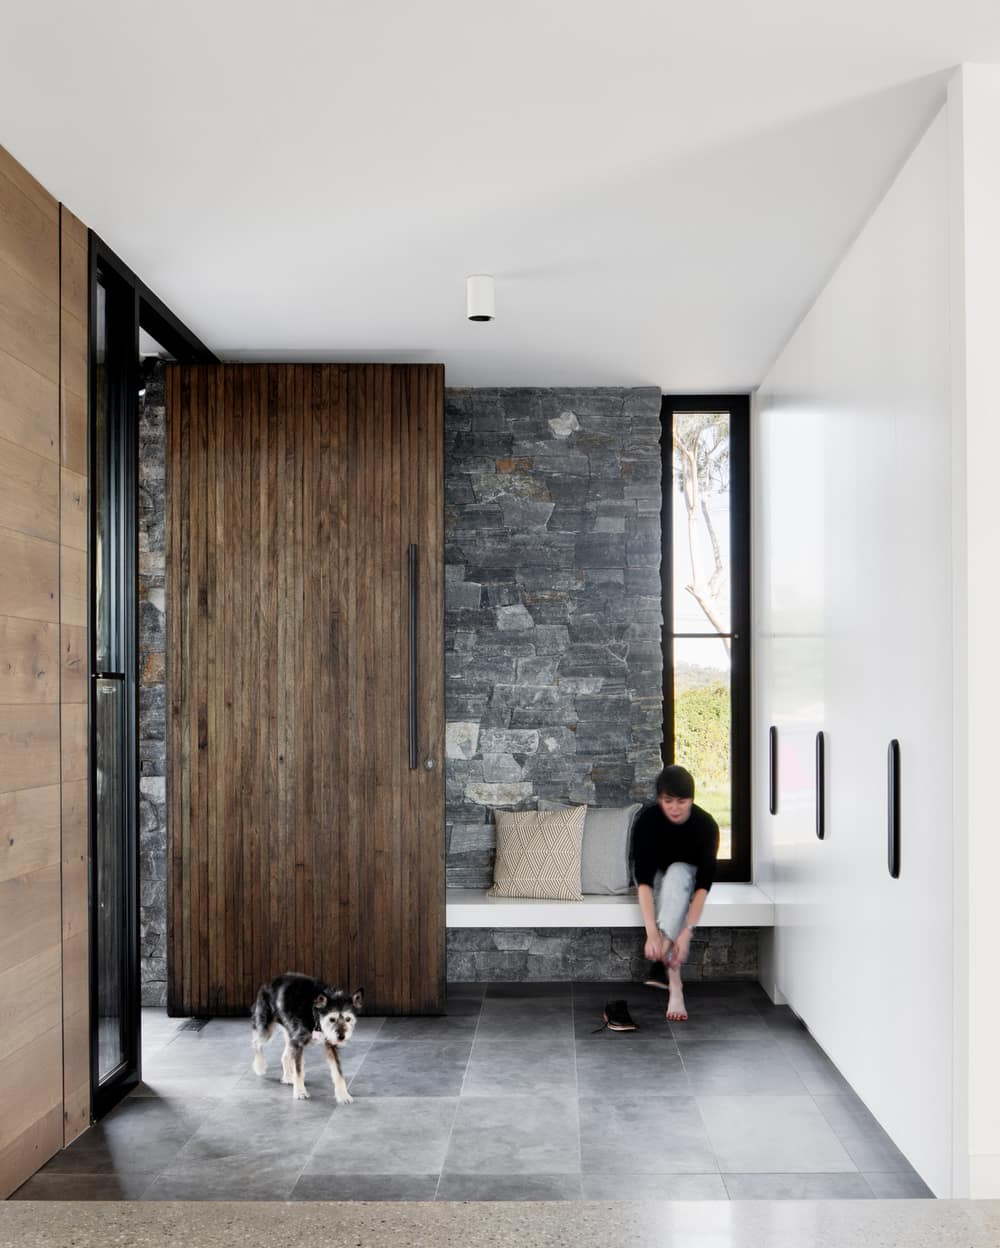 Kenny Street House / Chan Architecture